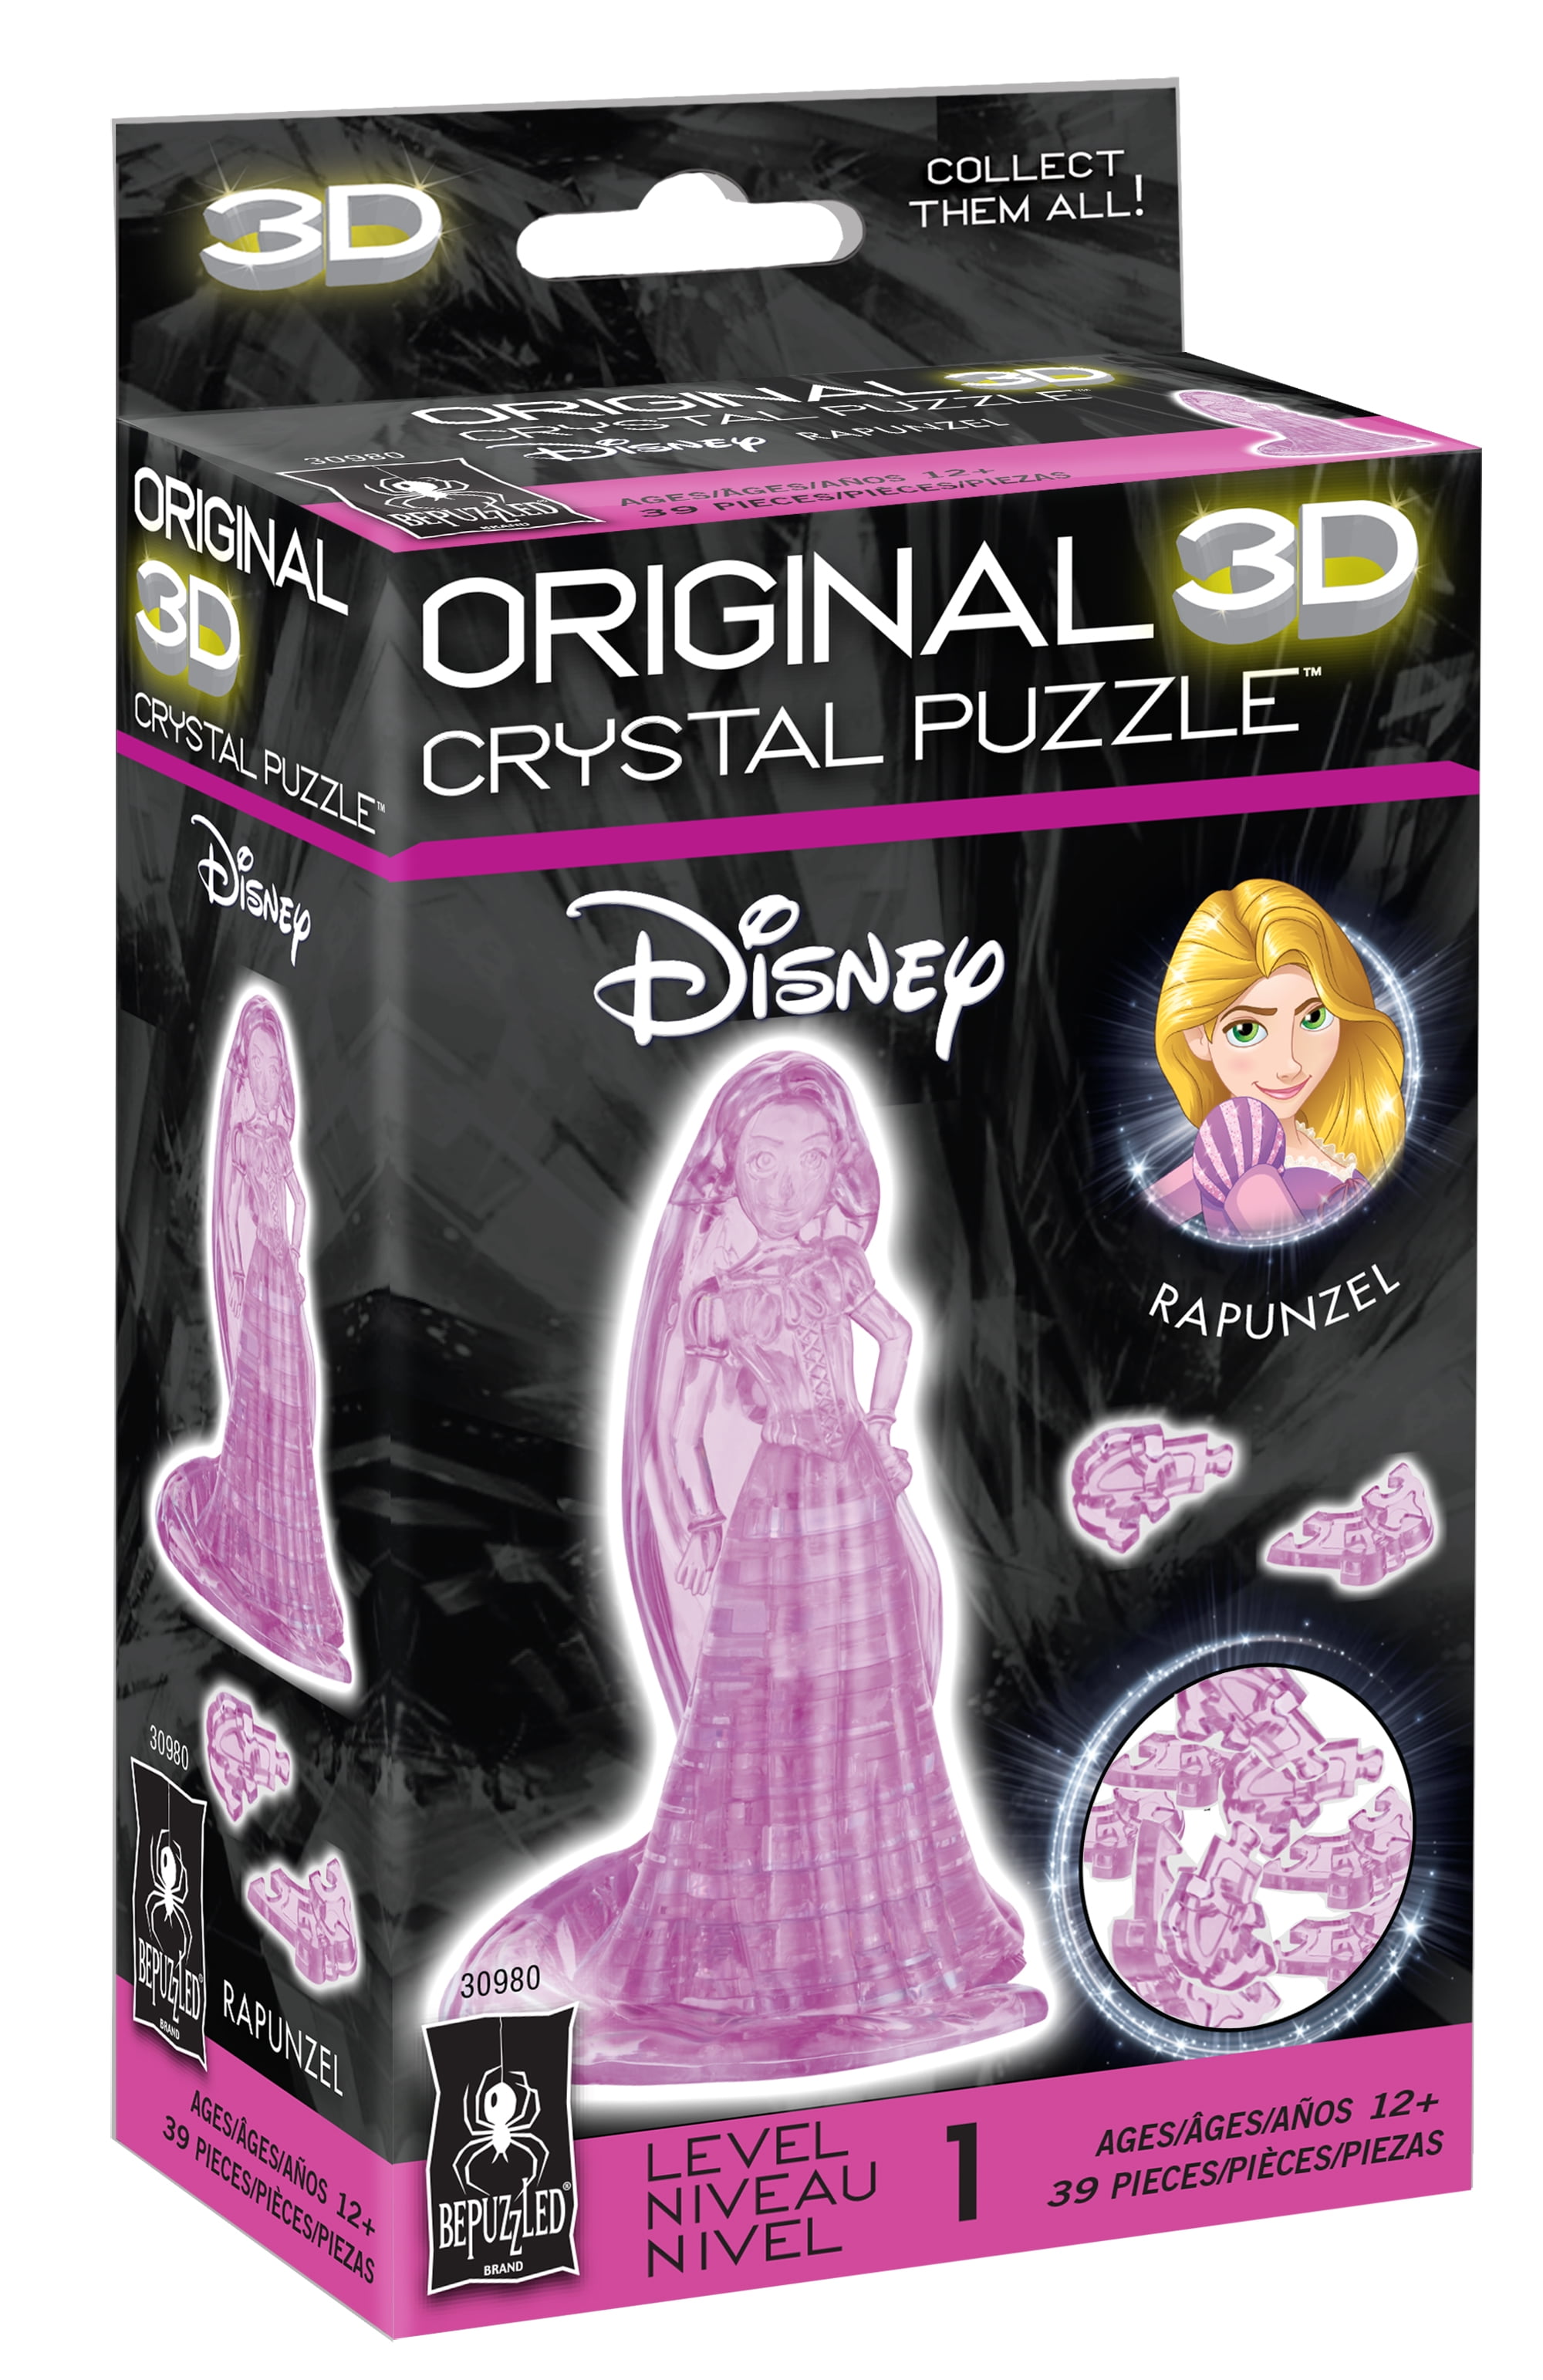 Purple 39 Pieces BePuzzled Original 3D Crystal Jigsaw Puzzle Level 1 Rapunzel Disney Tangled Brain Teaser Fun Decoration for Kids Age 12 and Up